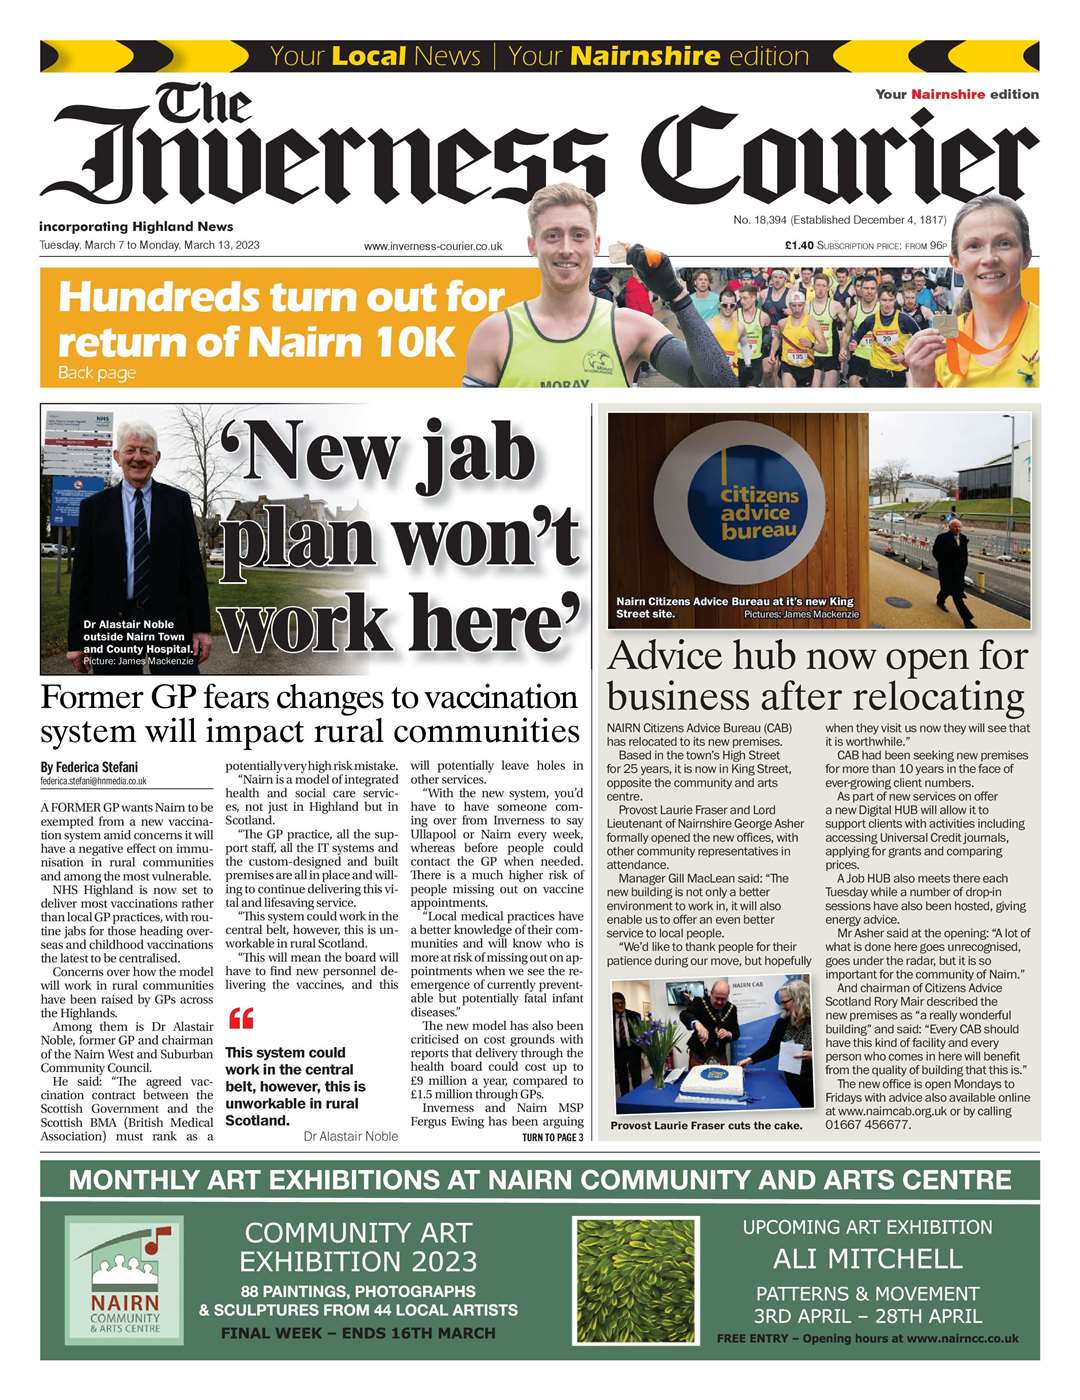 The Inverness Courier (Nairnshire edition), March 7, front page.